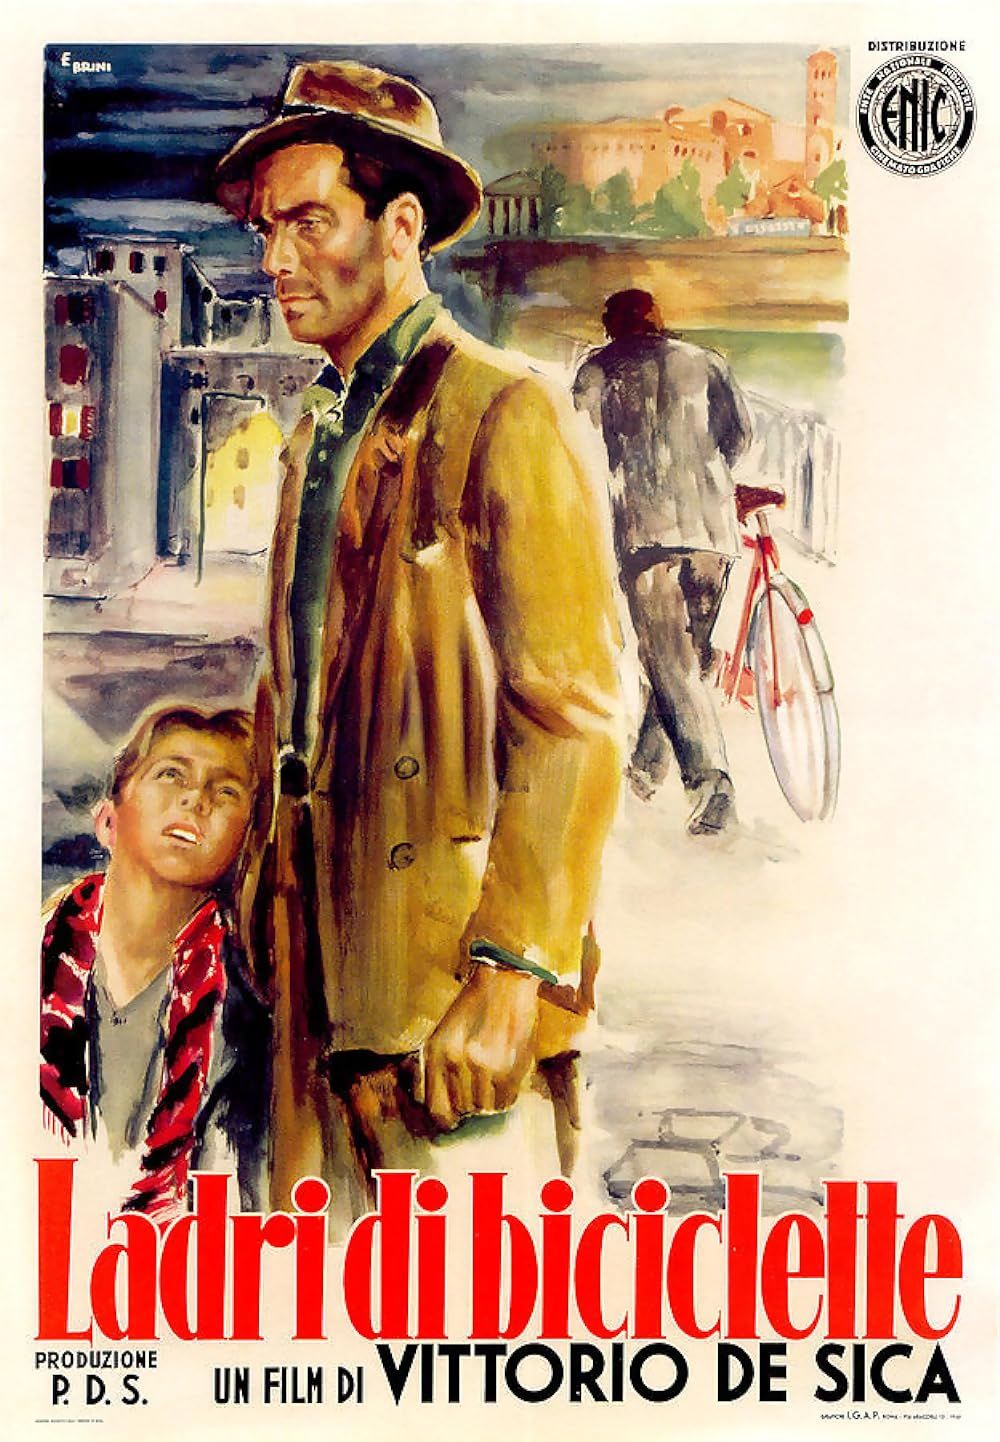 The Bicycle Thieves poster